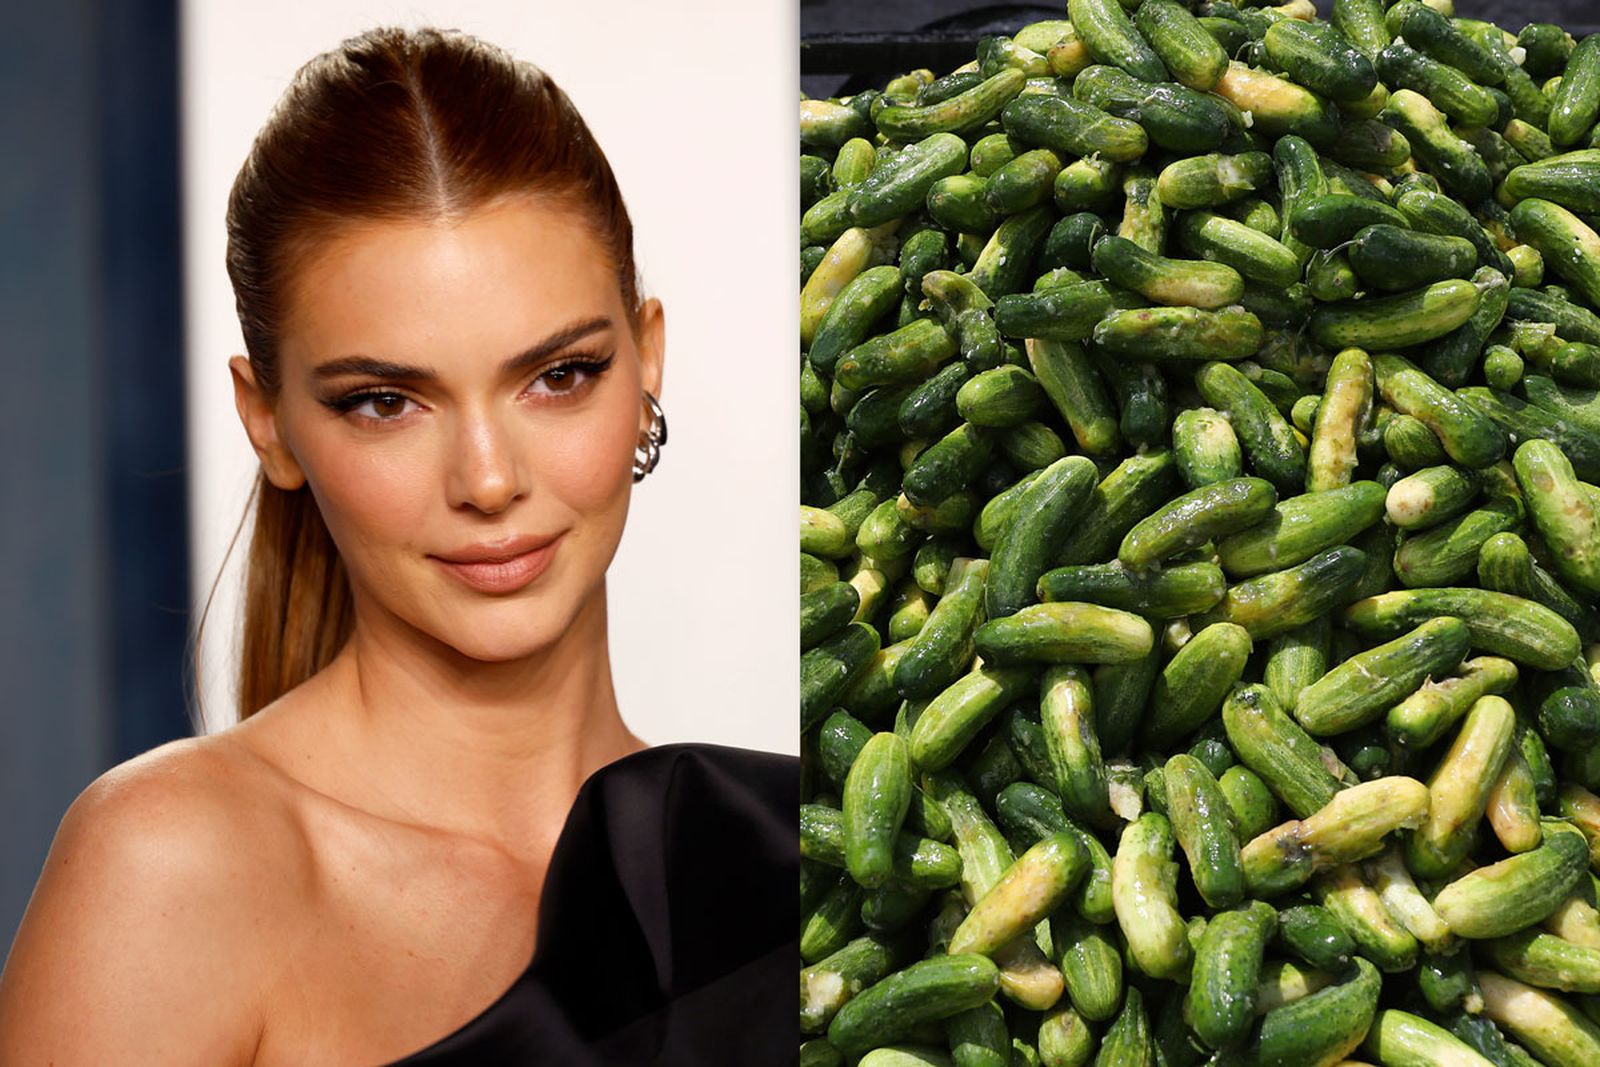 kendall-jenner-cucumber-cutting-chef-reaction-feat